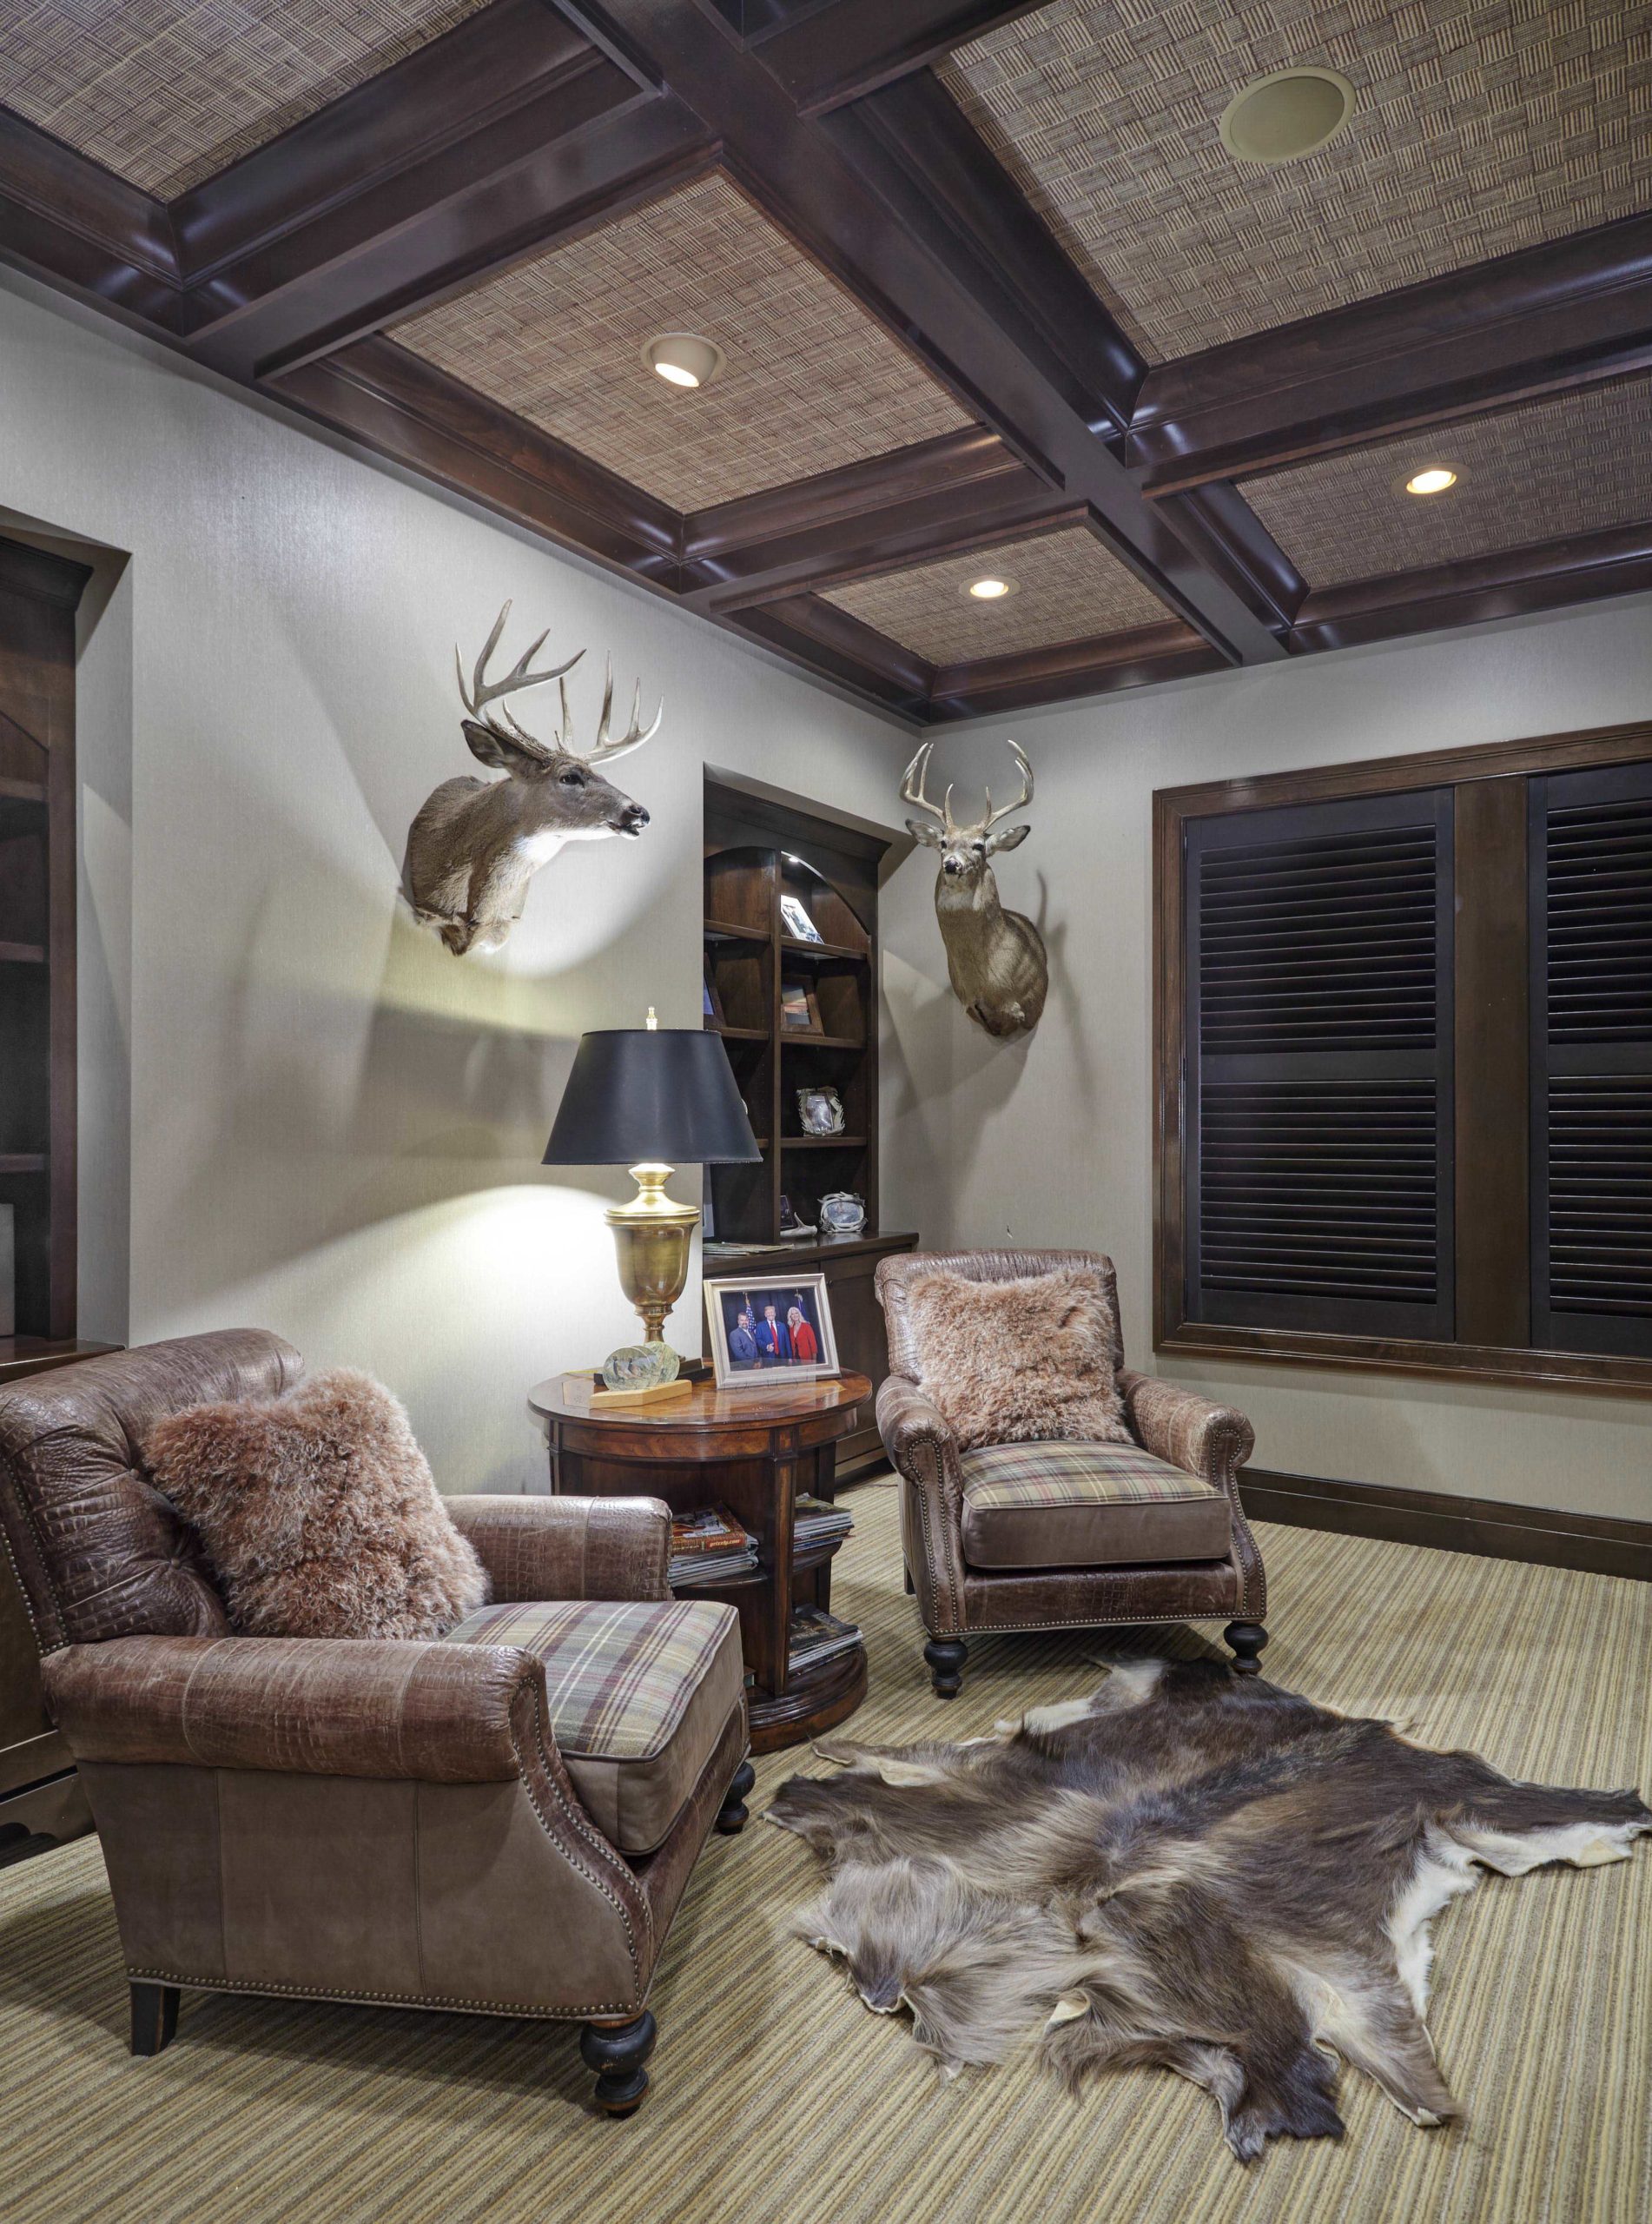 Brown leather chairs under deer heads